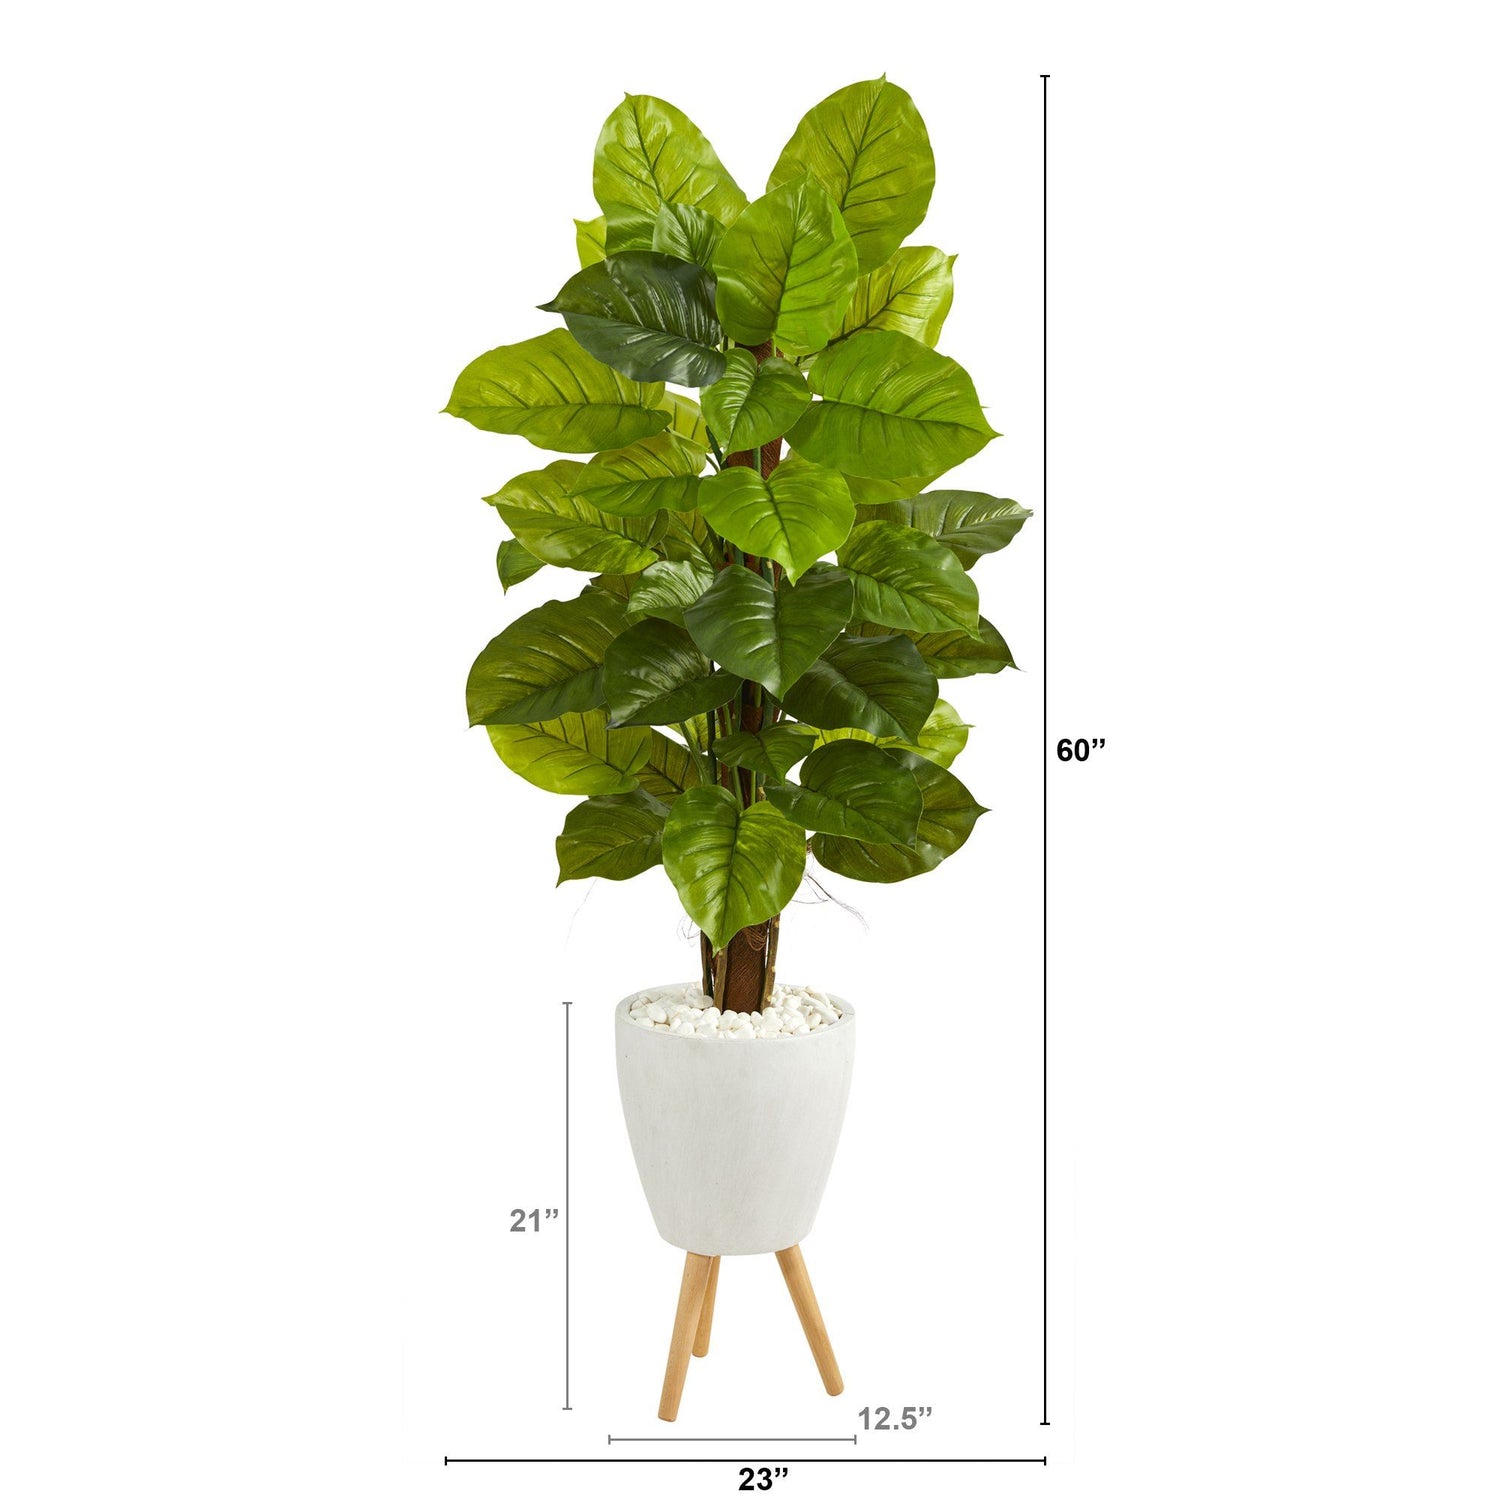 60” Large Leaf Philodendron Artificial Plant in White Planter with Stand (Real Touch)